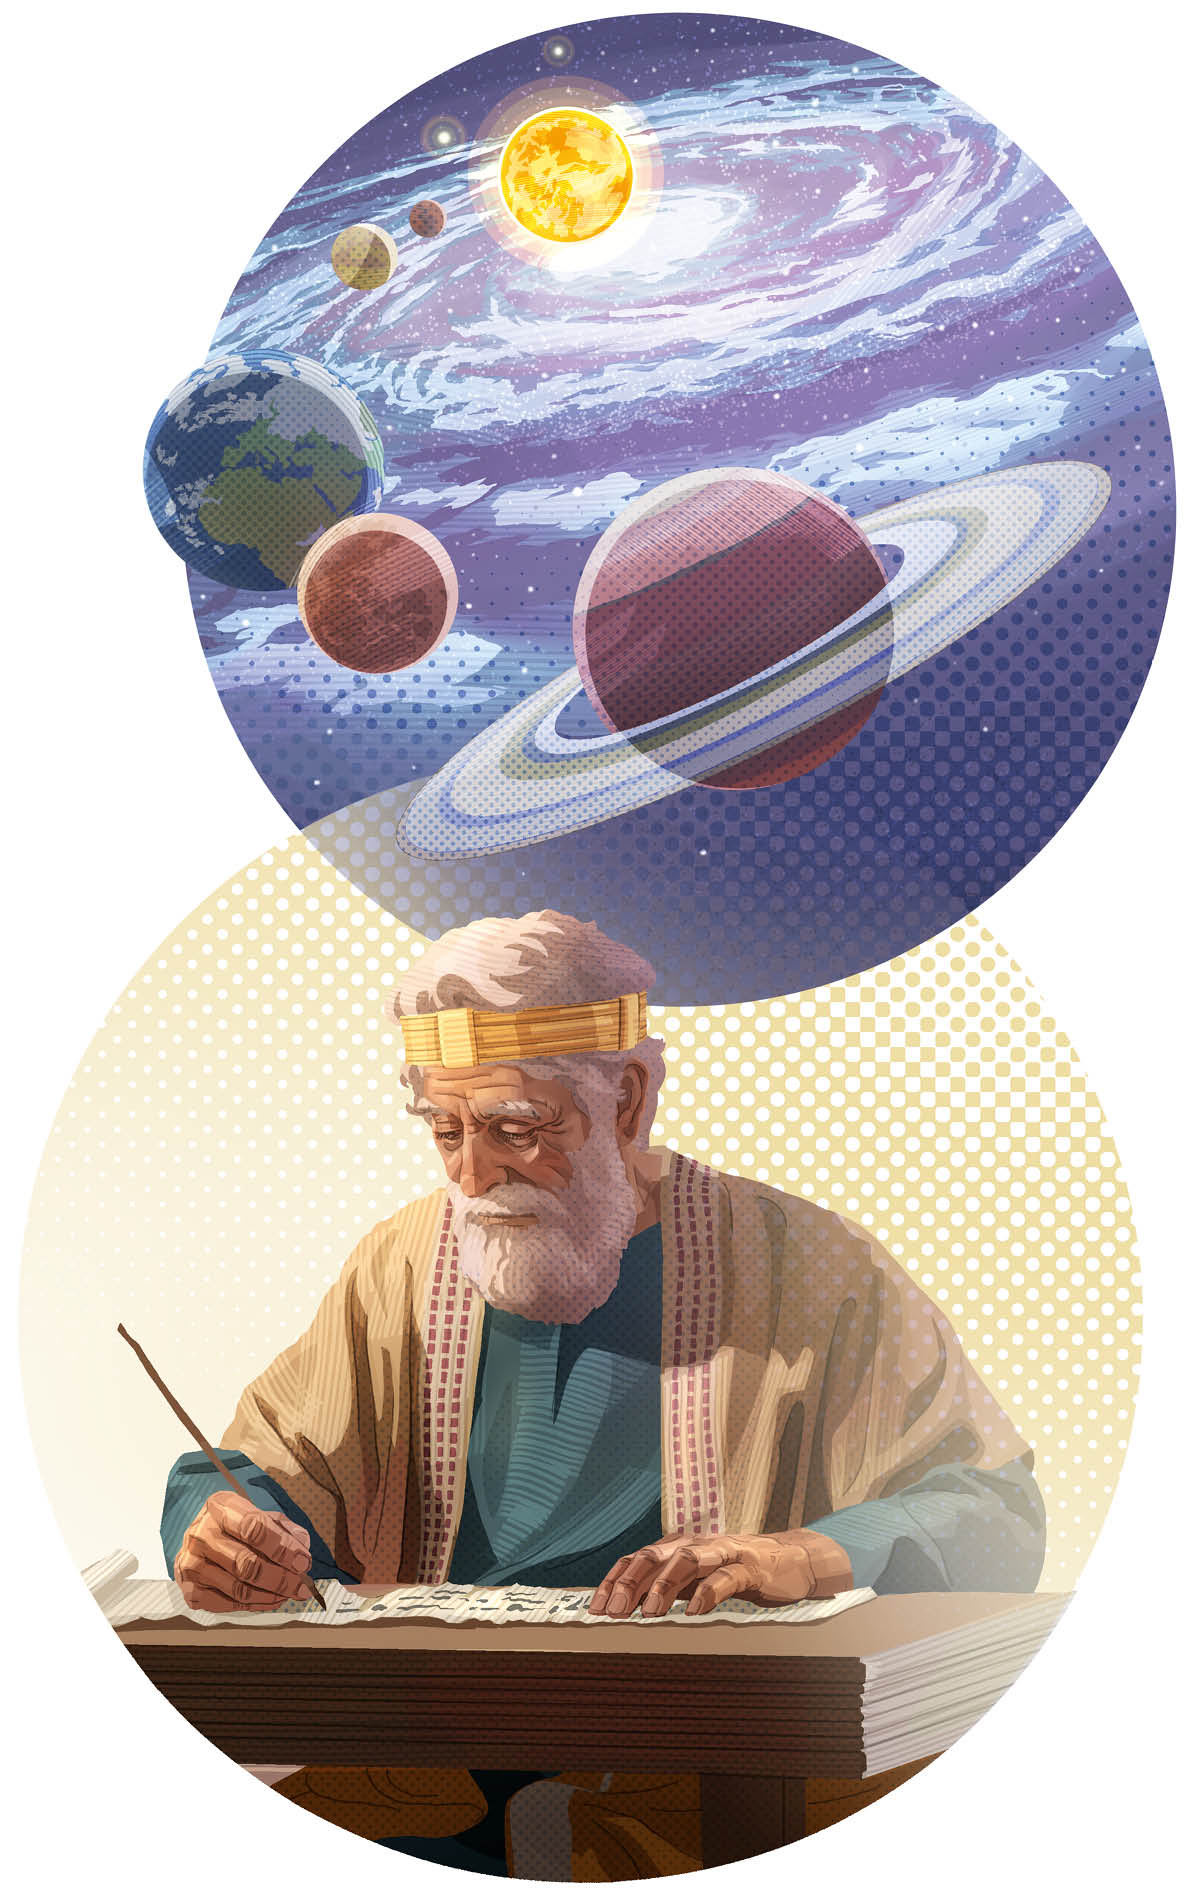 Collage: Things accomplished by God’s holy spirit. 1. Planets and the universe. 2. A Bible writer records God’s inspired thoughts in a scroll.